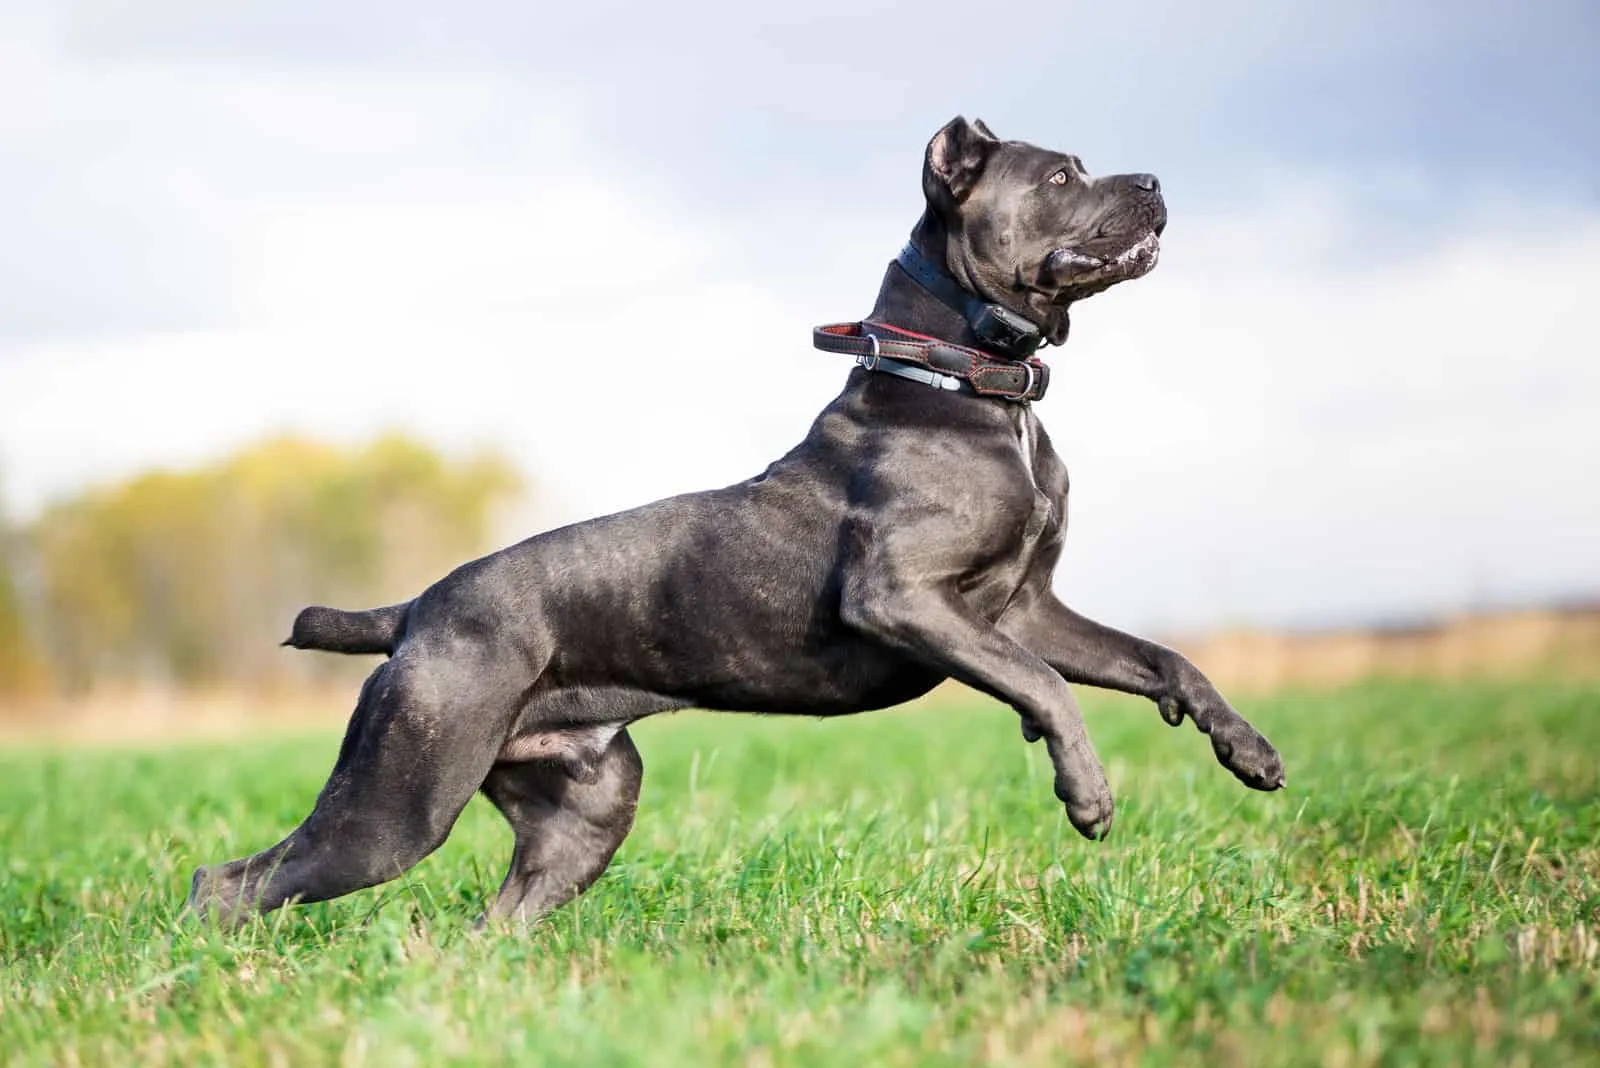 Cane Corso playing outside on grass